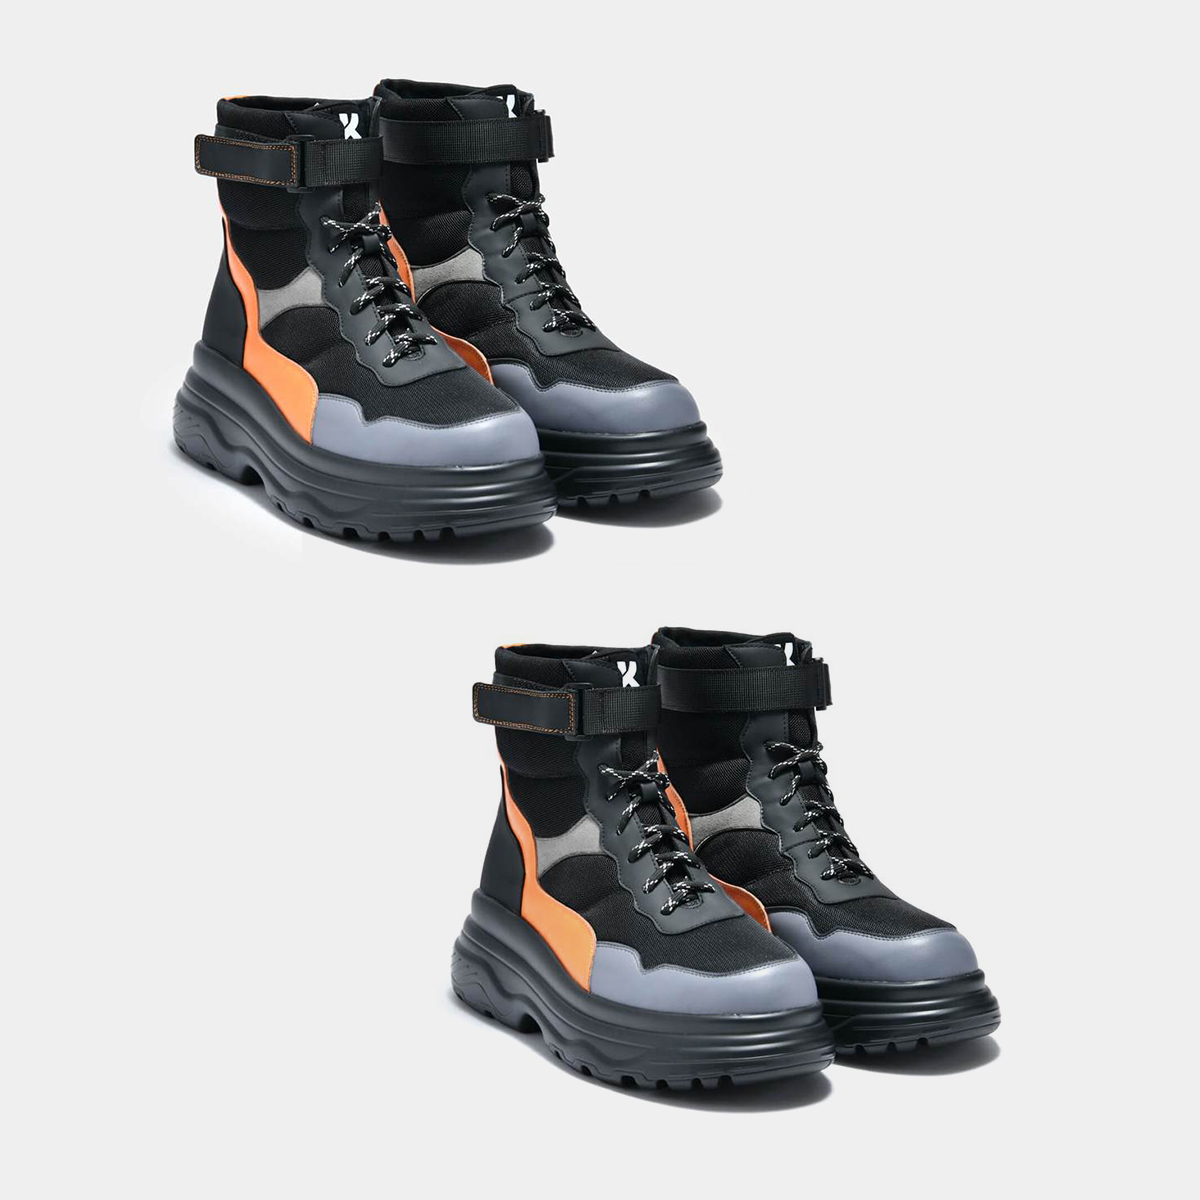 SOLLUX CAPTOR and the APACHE Trail Boots, because duality is key!SHOP   https://bit.ly/3ilVKrF CREDIT: https://www.pinterest.co.uk/pin/355995545518256591/